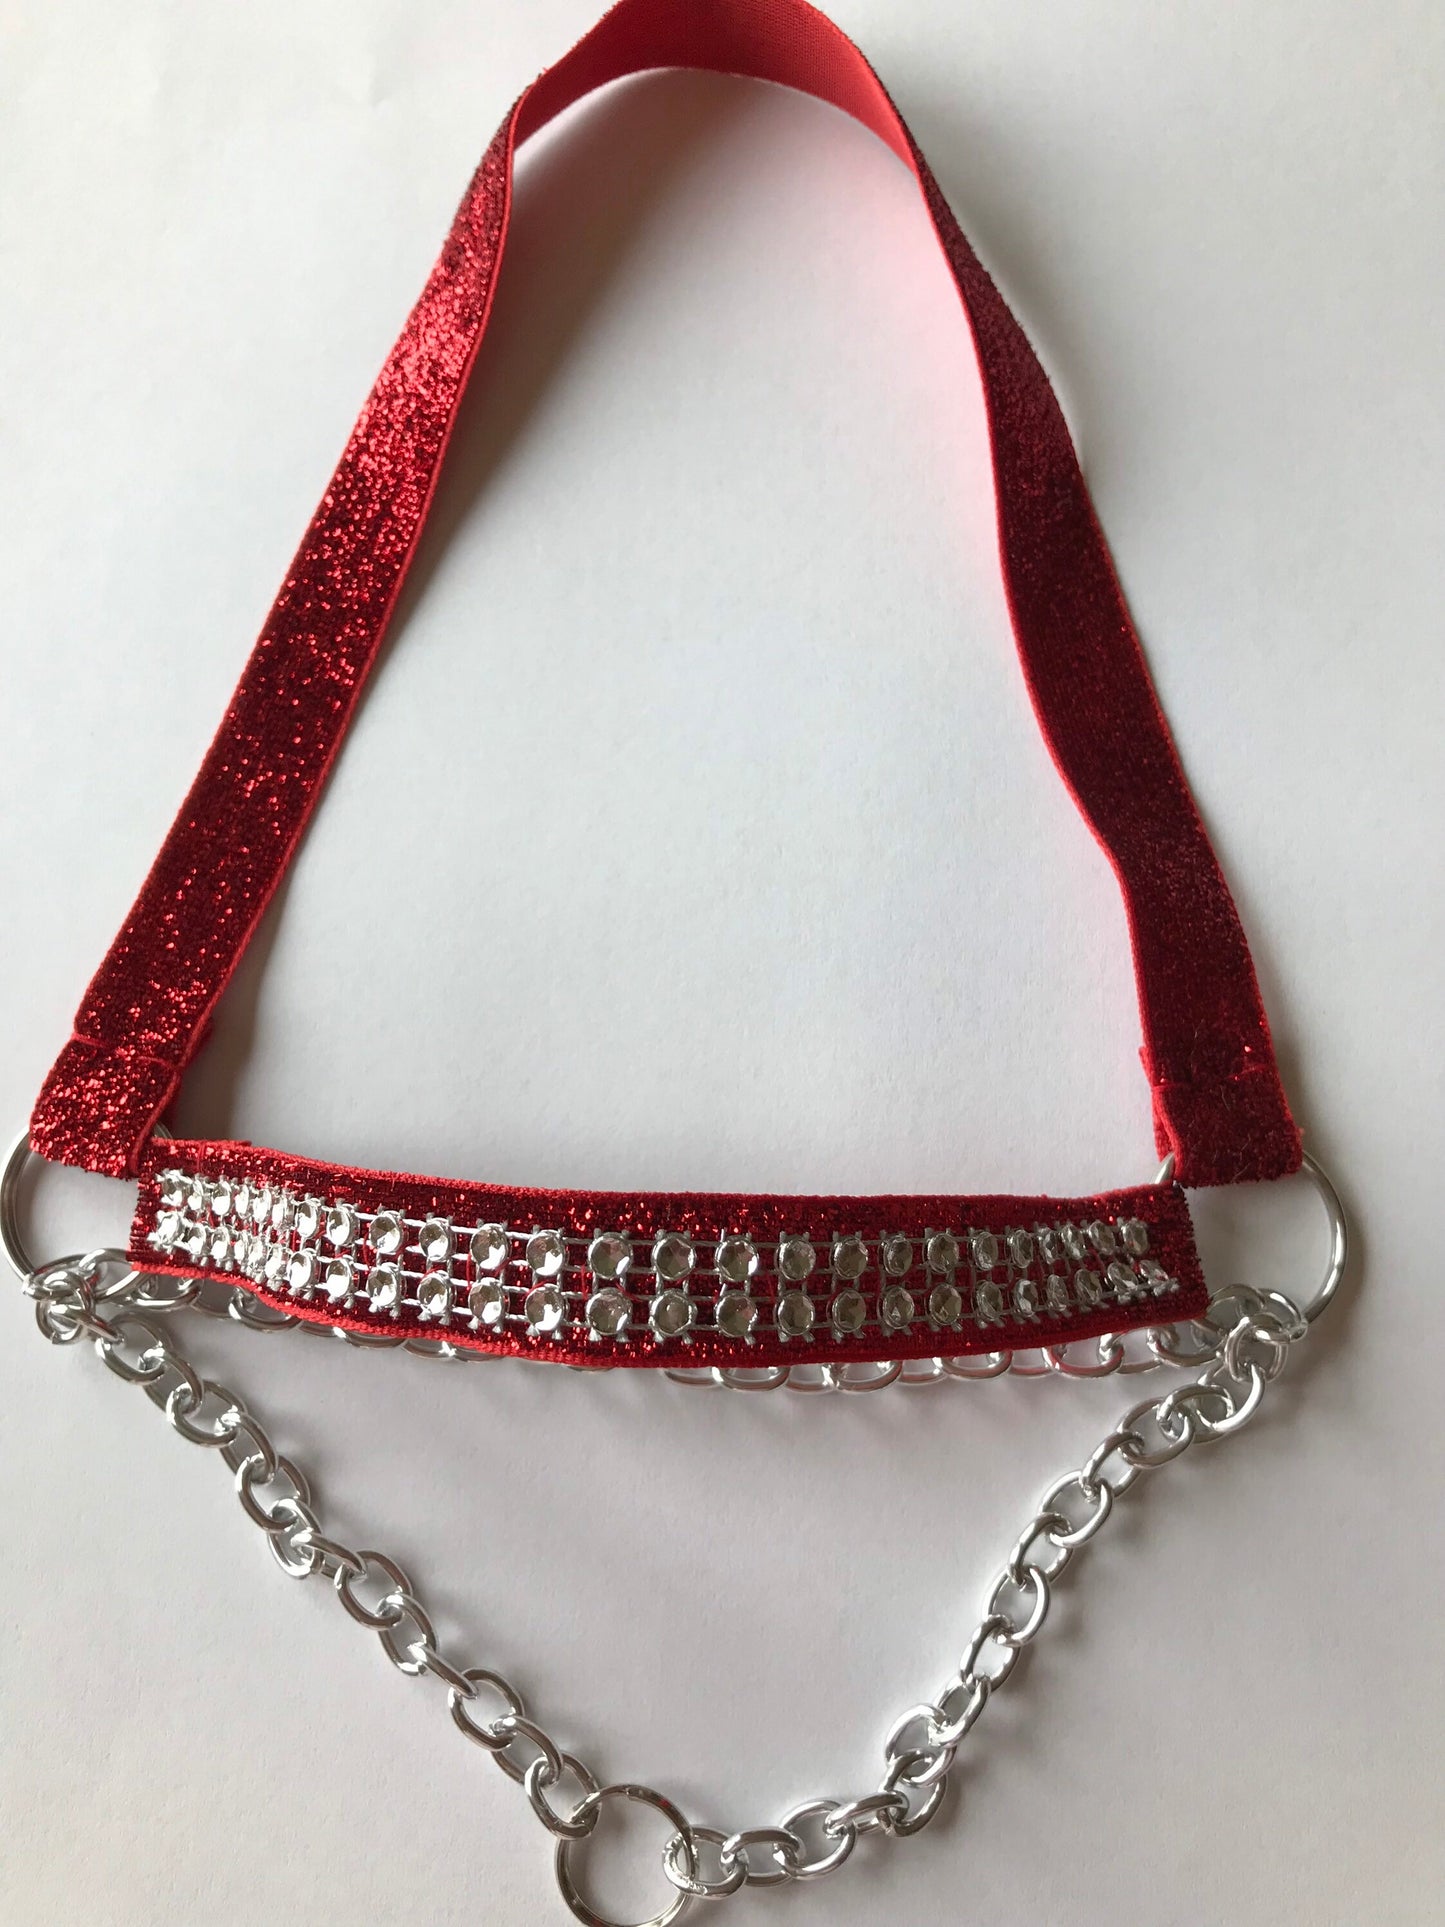 Hobby horse show halter&lead red with bling, Hobby horse tack, Hobby horse accessories, Limited edition Christmas hobby horse tack